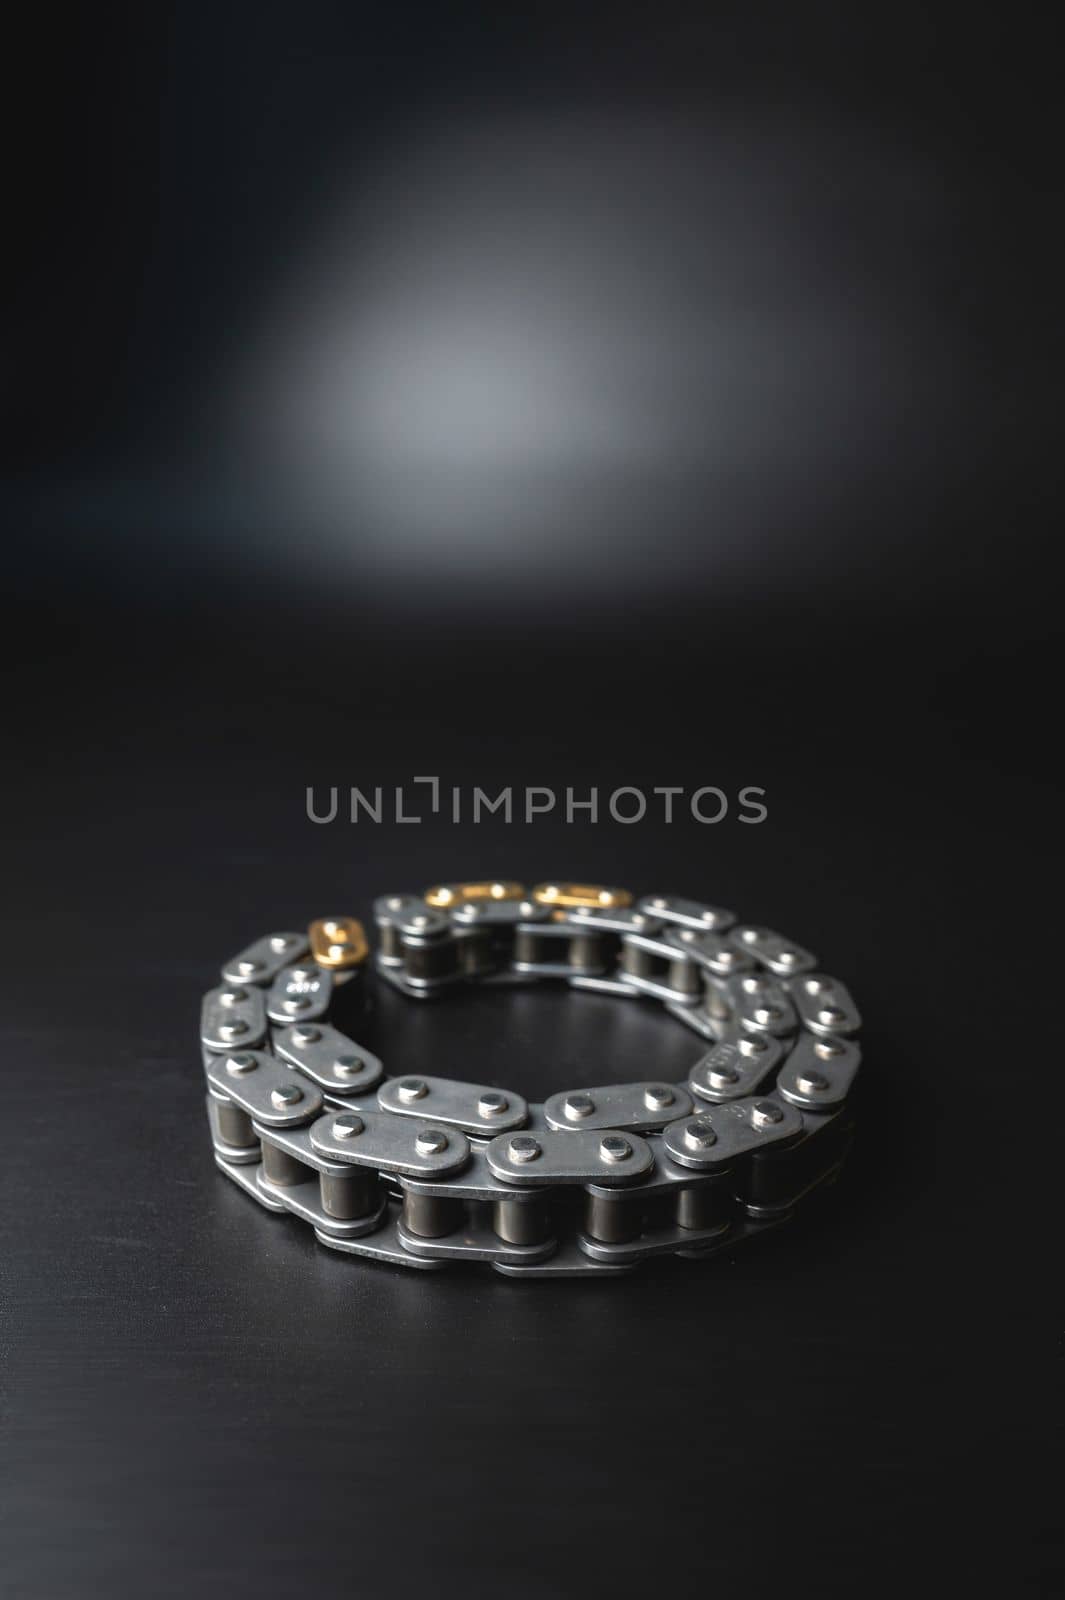 New timing chain on a black background close-up in selective focus by yanik88